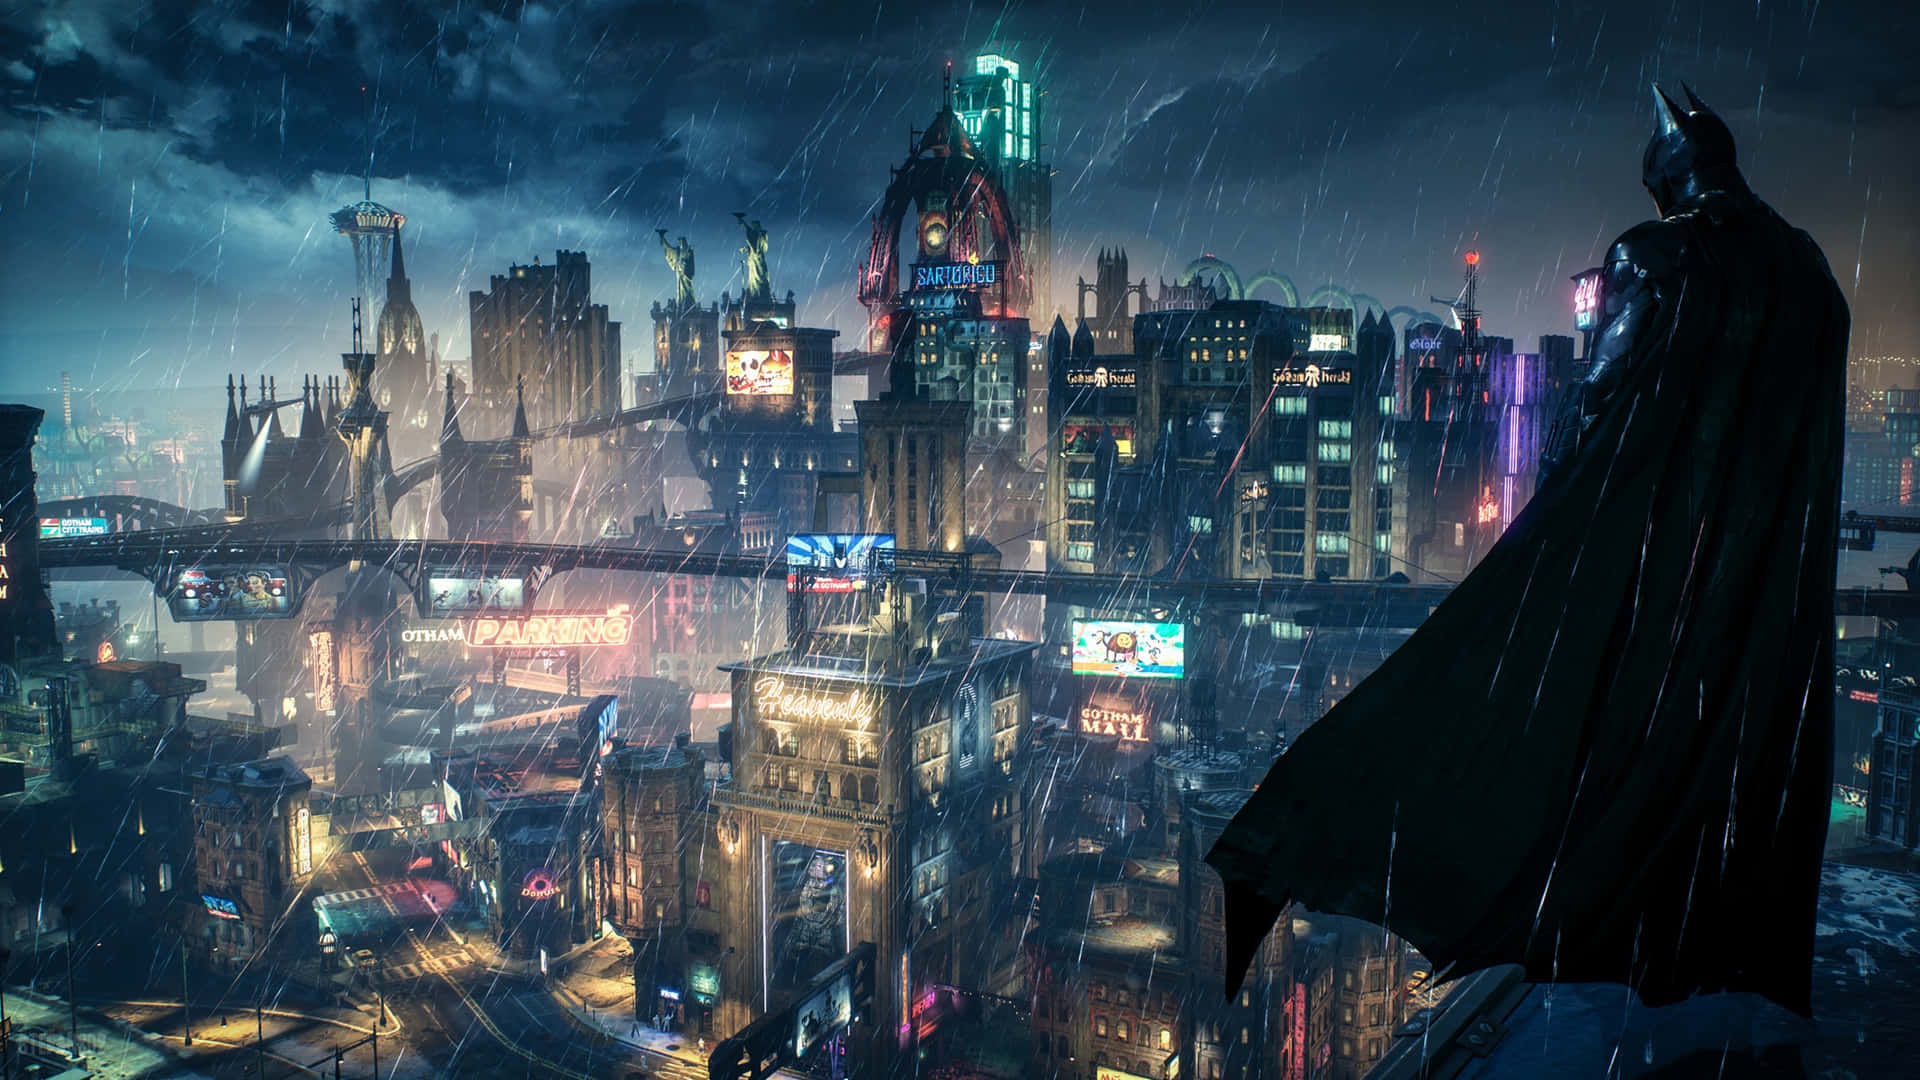 Join the Batman in his epic battle against chaos and destruction in the city of Gotham with Batman: Arkham Knight. Wallpaper